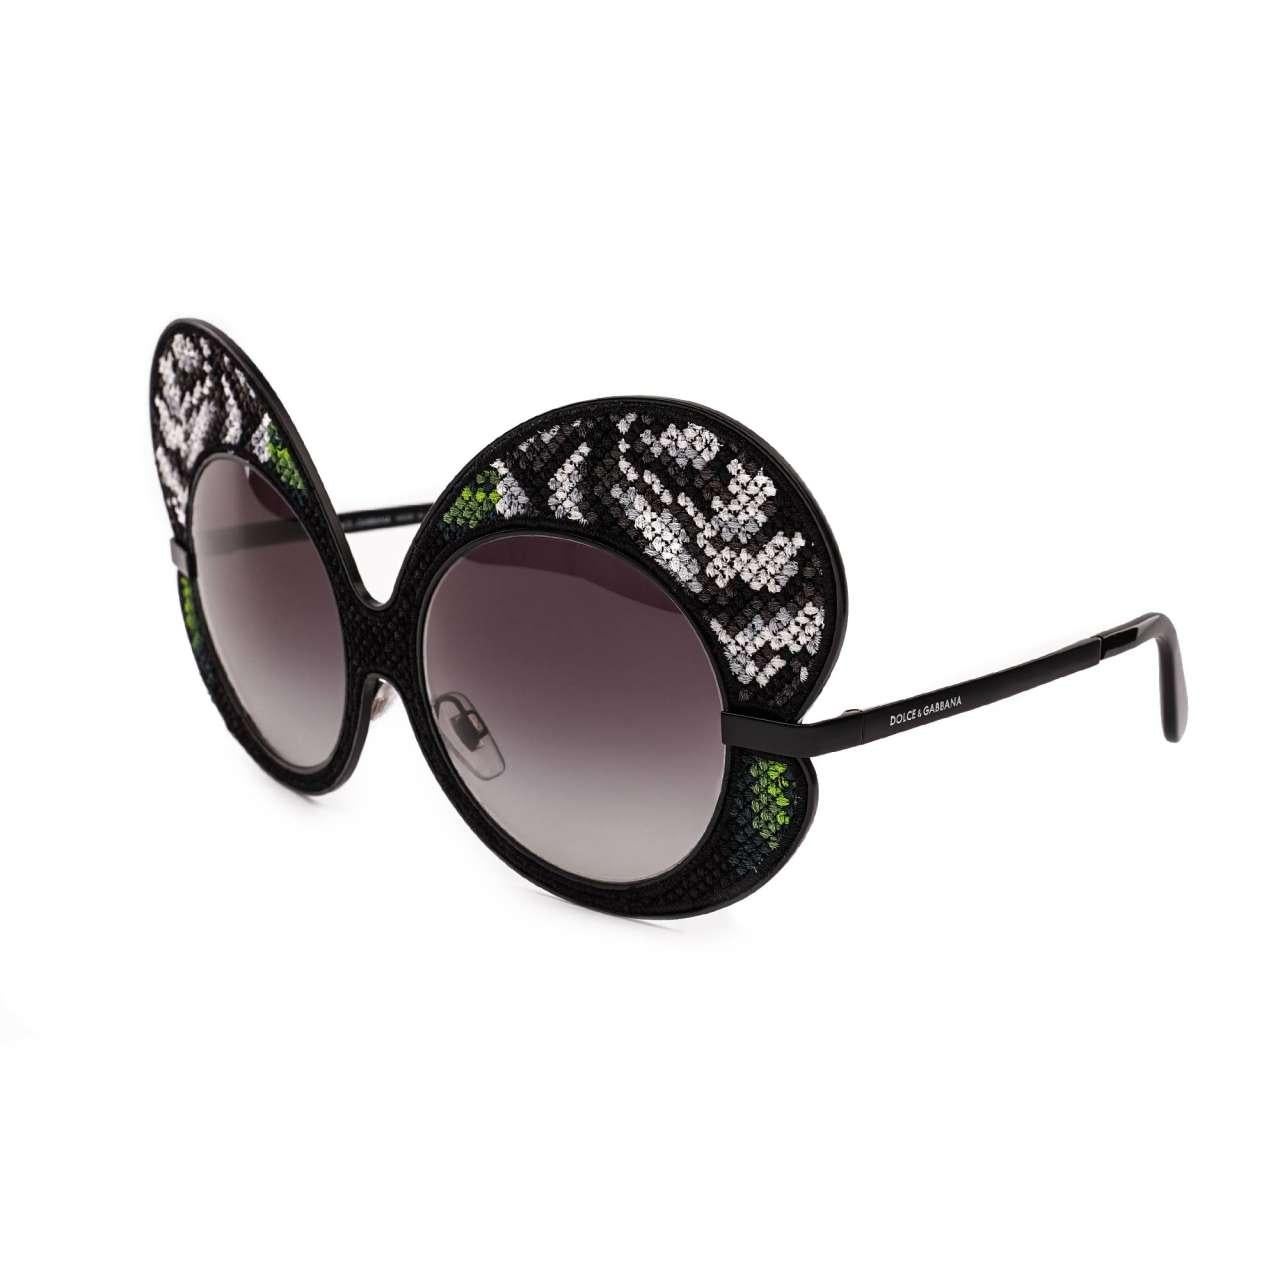 - Special Edition Butterfly Sunglasses DG2163 embellished with flower hand embroidery by DOLCE & GABBANA - MADE IN ITALY - Former RRP: EUR 700 - New with Case - Model: VG2163-VM48H-9V000 - Color Frame: Black / Green / White / Gray - Color Lense: Mat